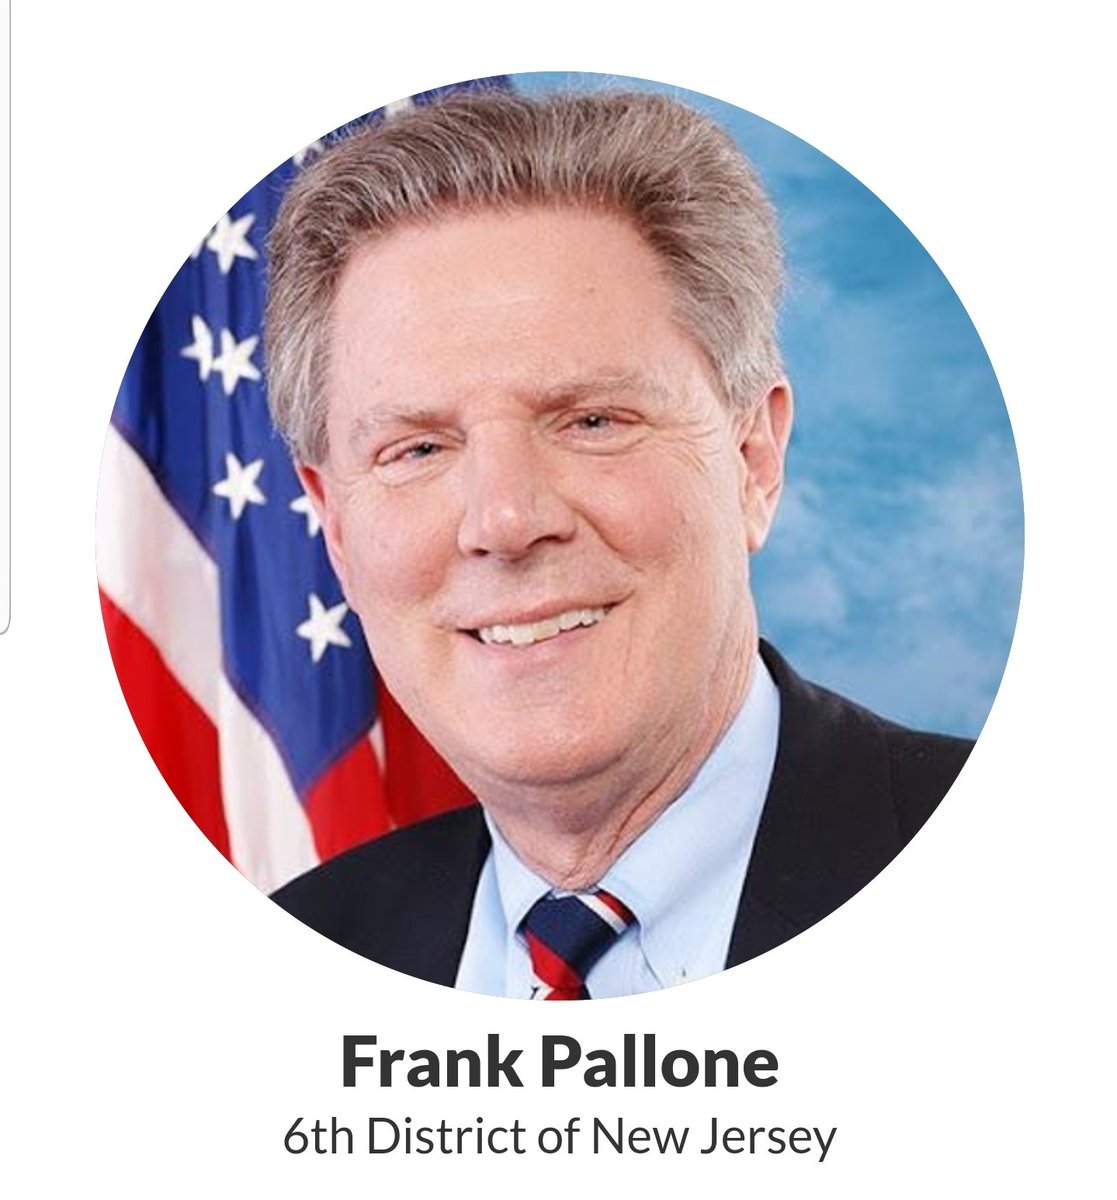 Frank Pallone, New Jersey's 6th District https://pallone.house.gov/ 60/98